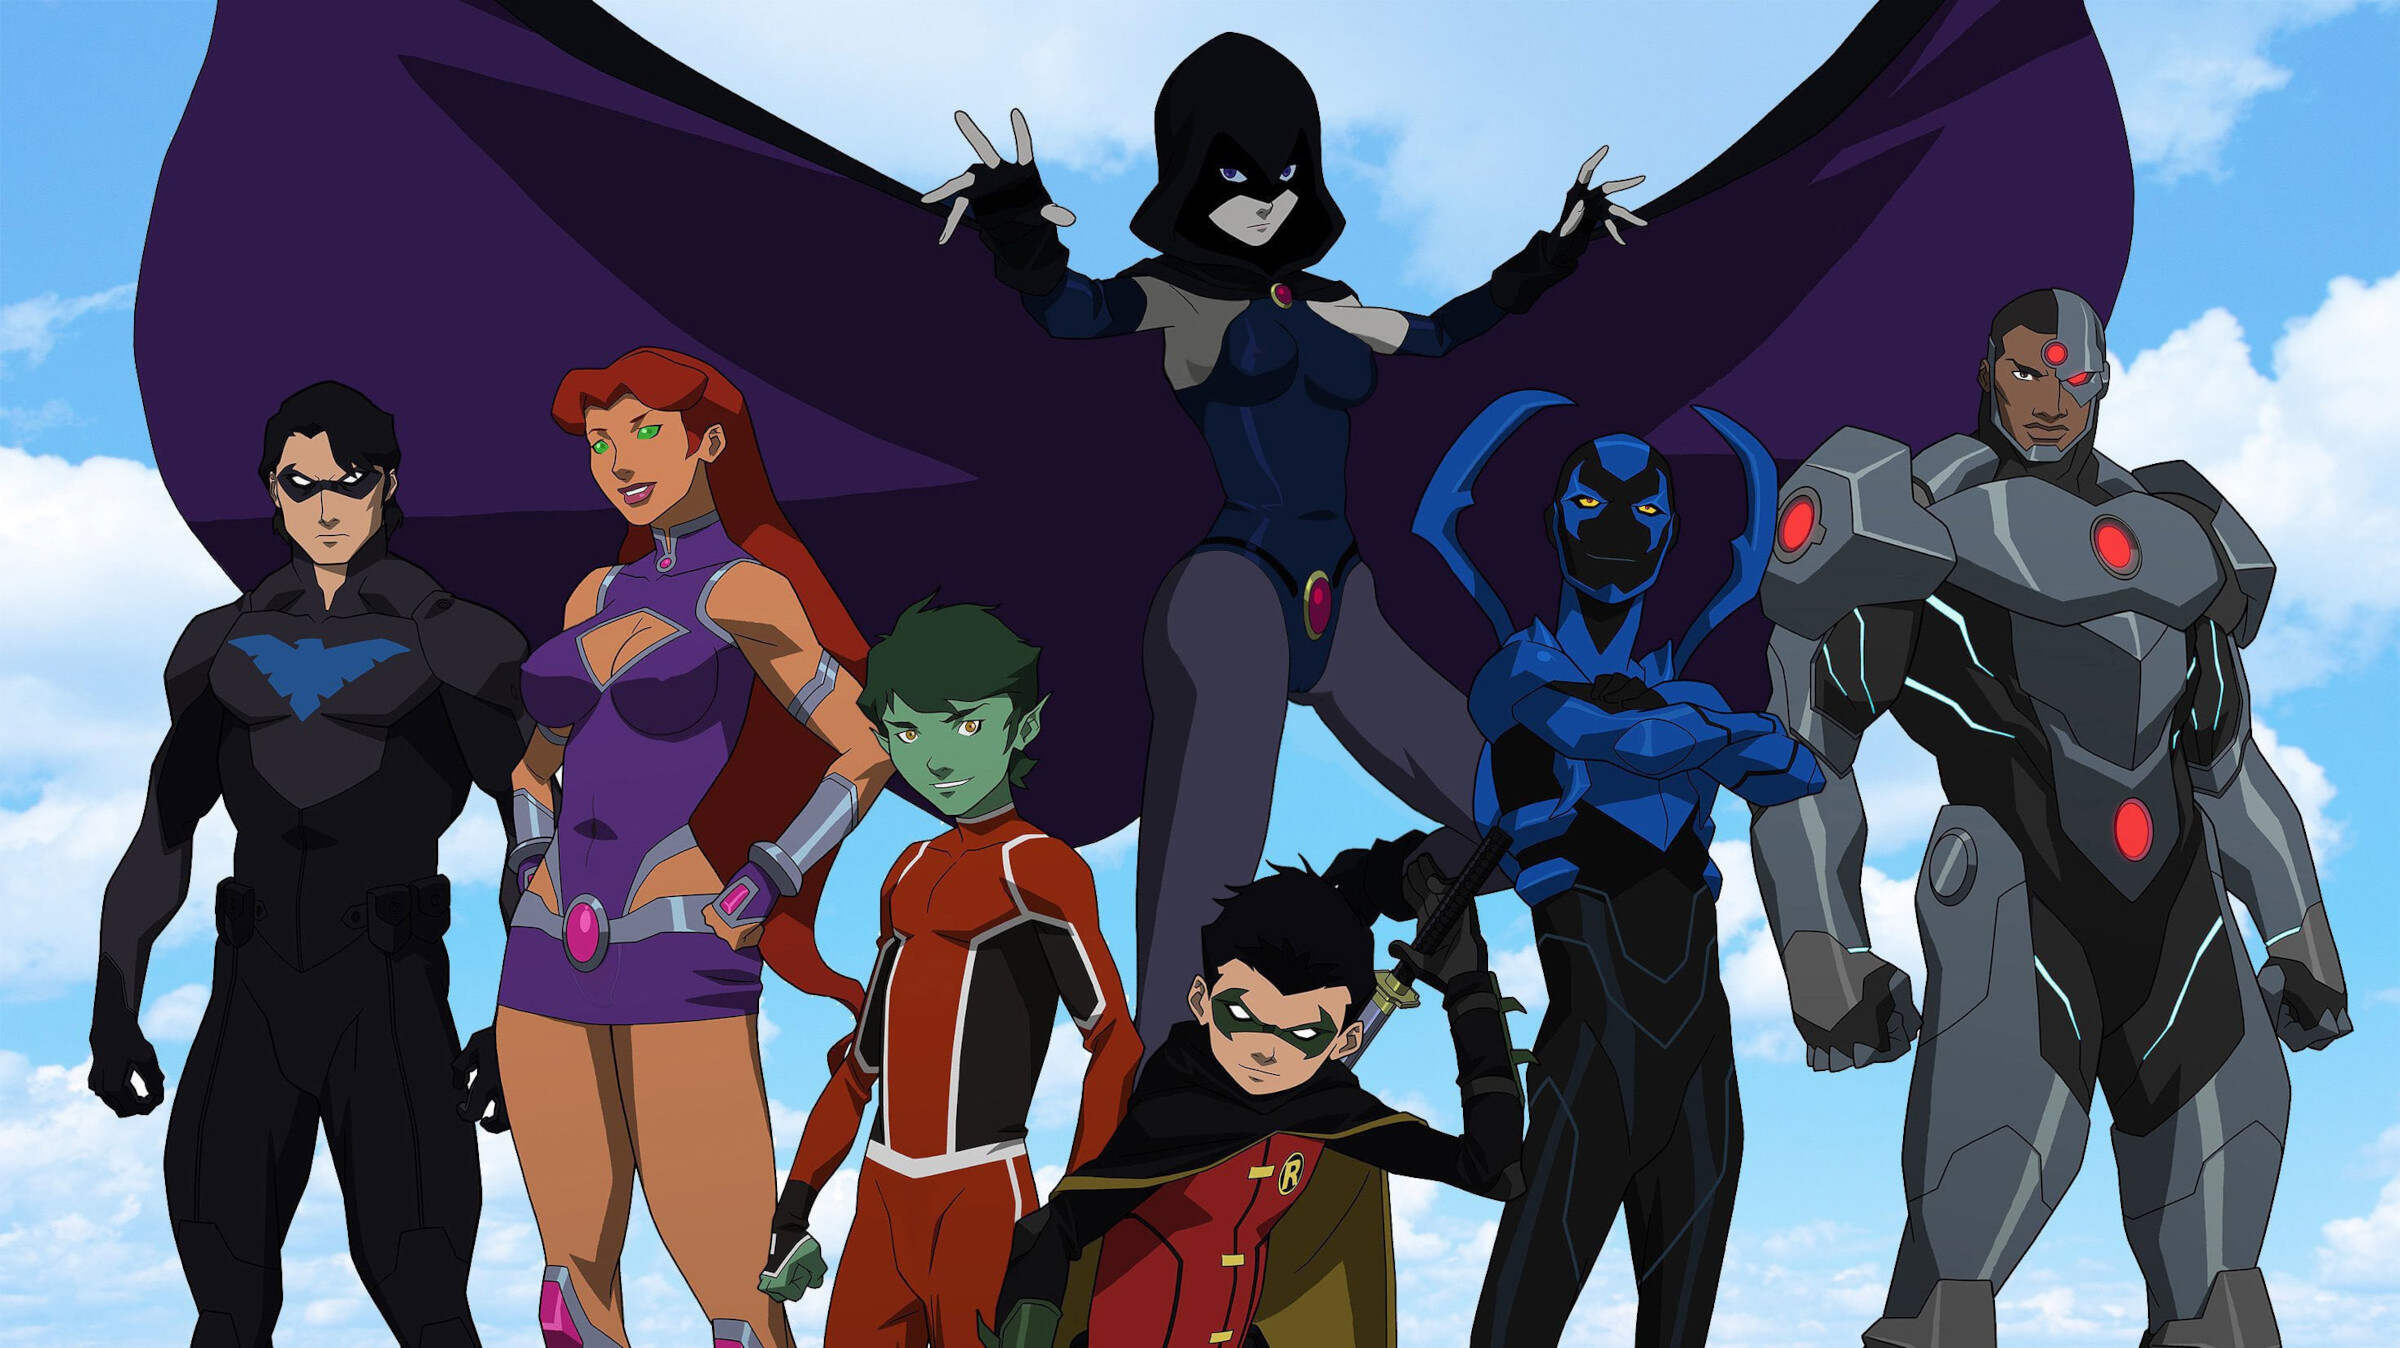 justice league vs teen titans full movie online free daily